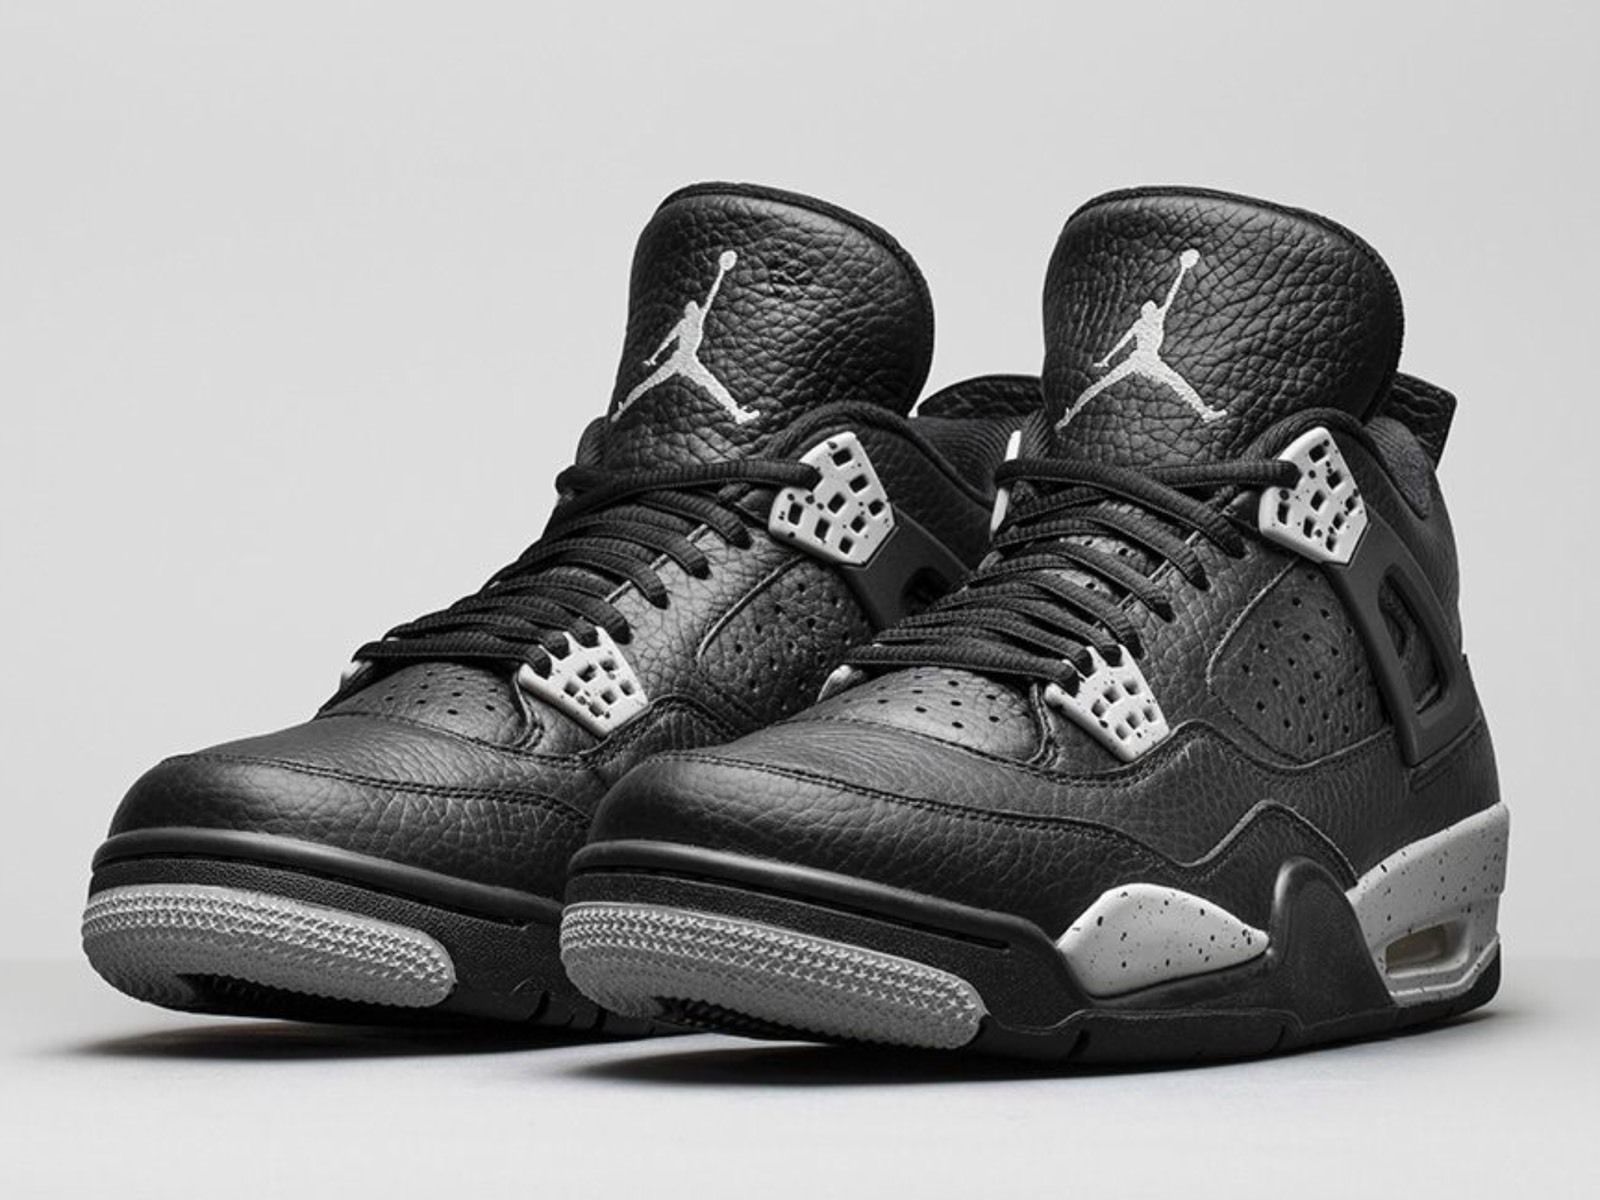 Air Jordan Shoes Picture Free Download 4 Oreo